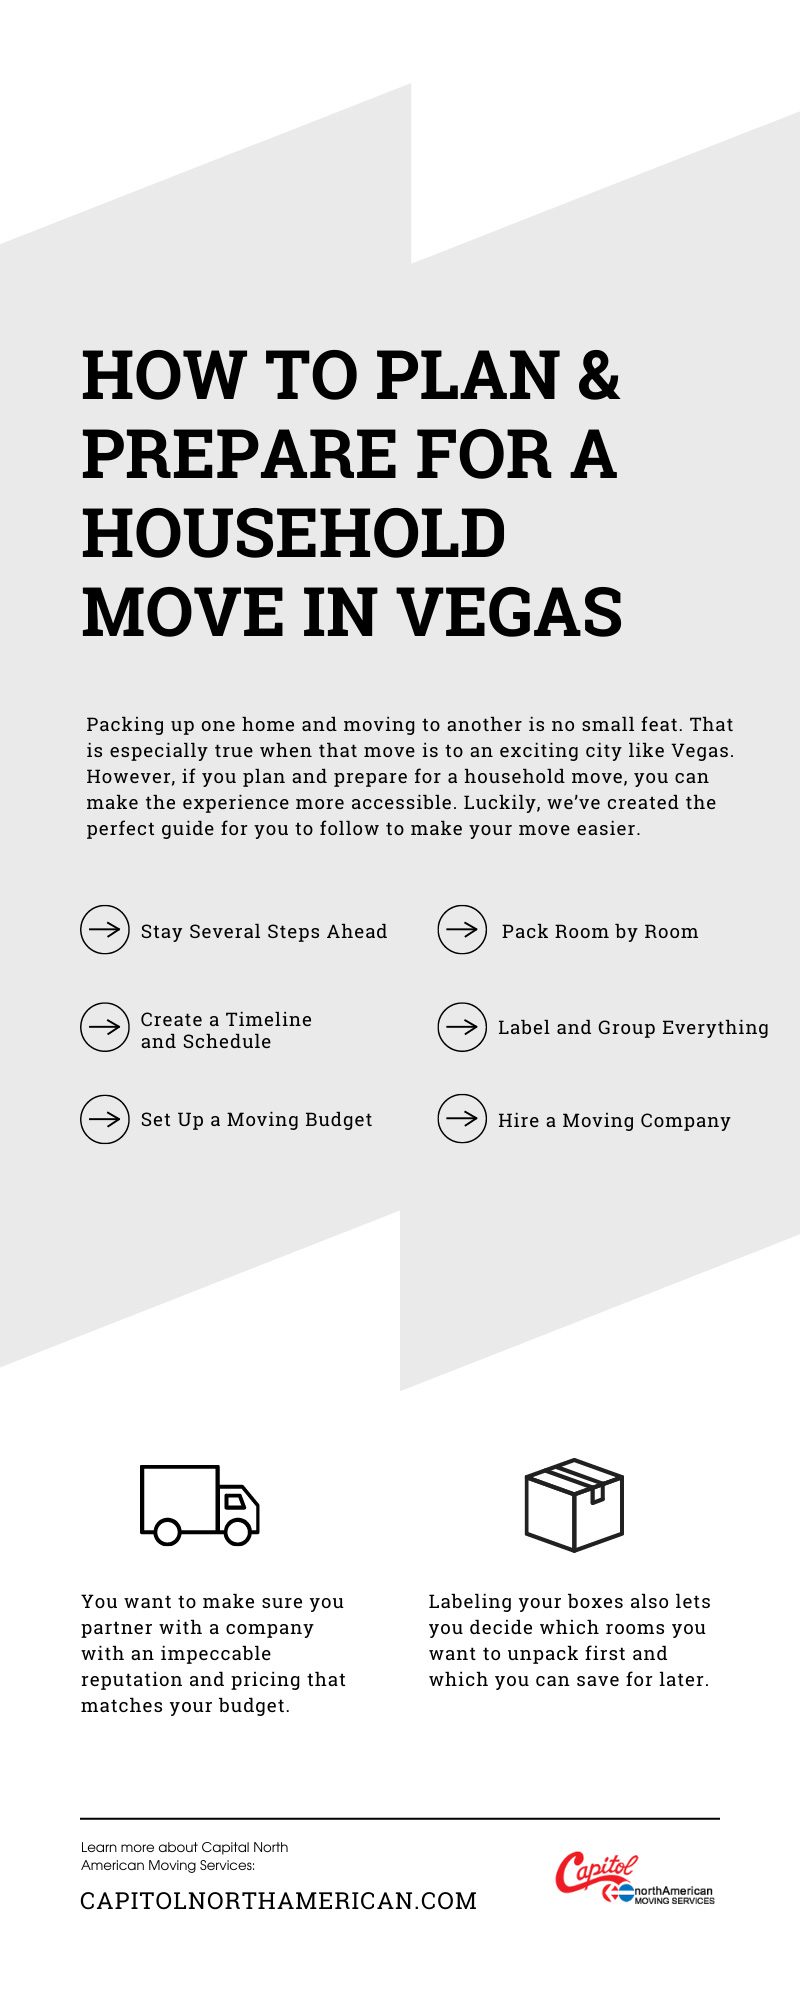 How To Plan & Prepare for a Household Move in Vegas